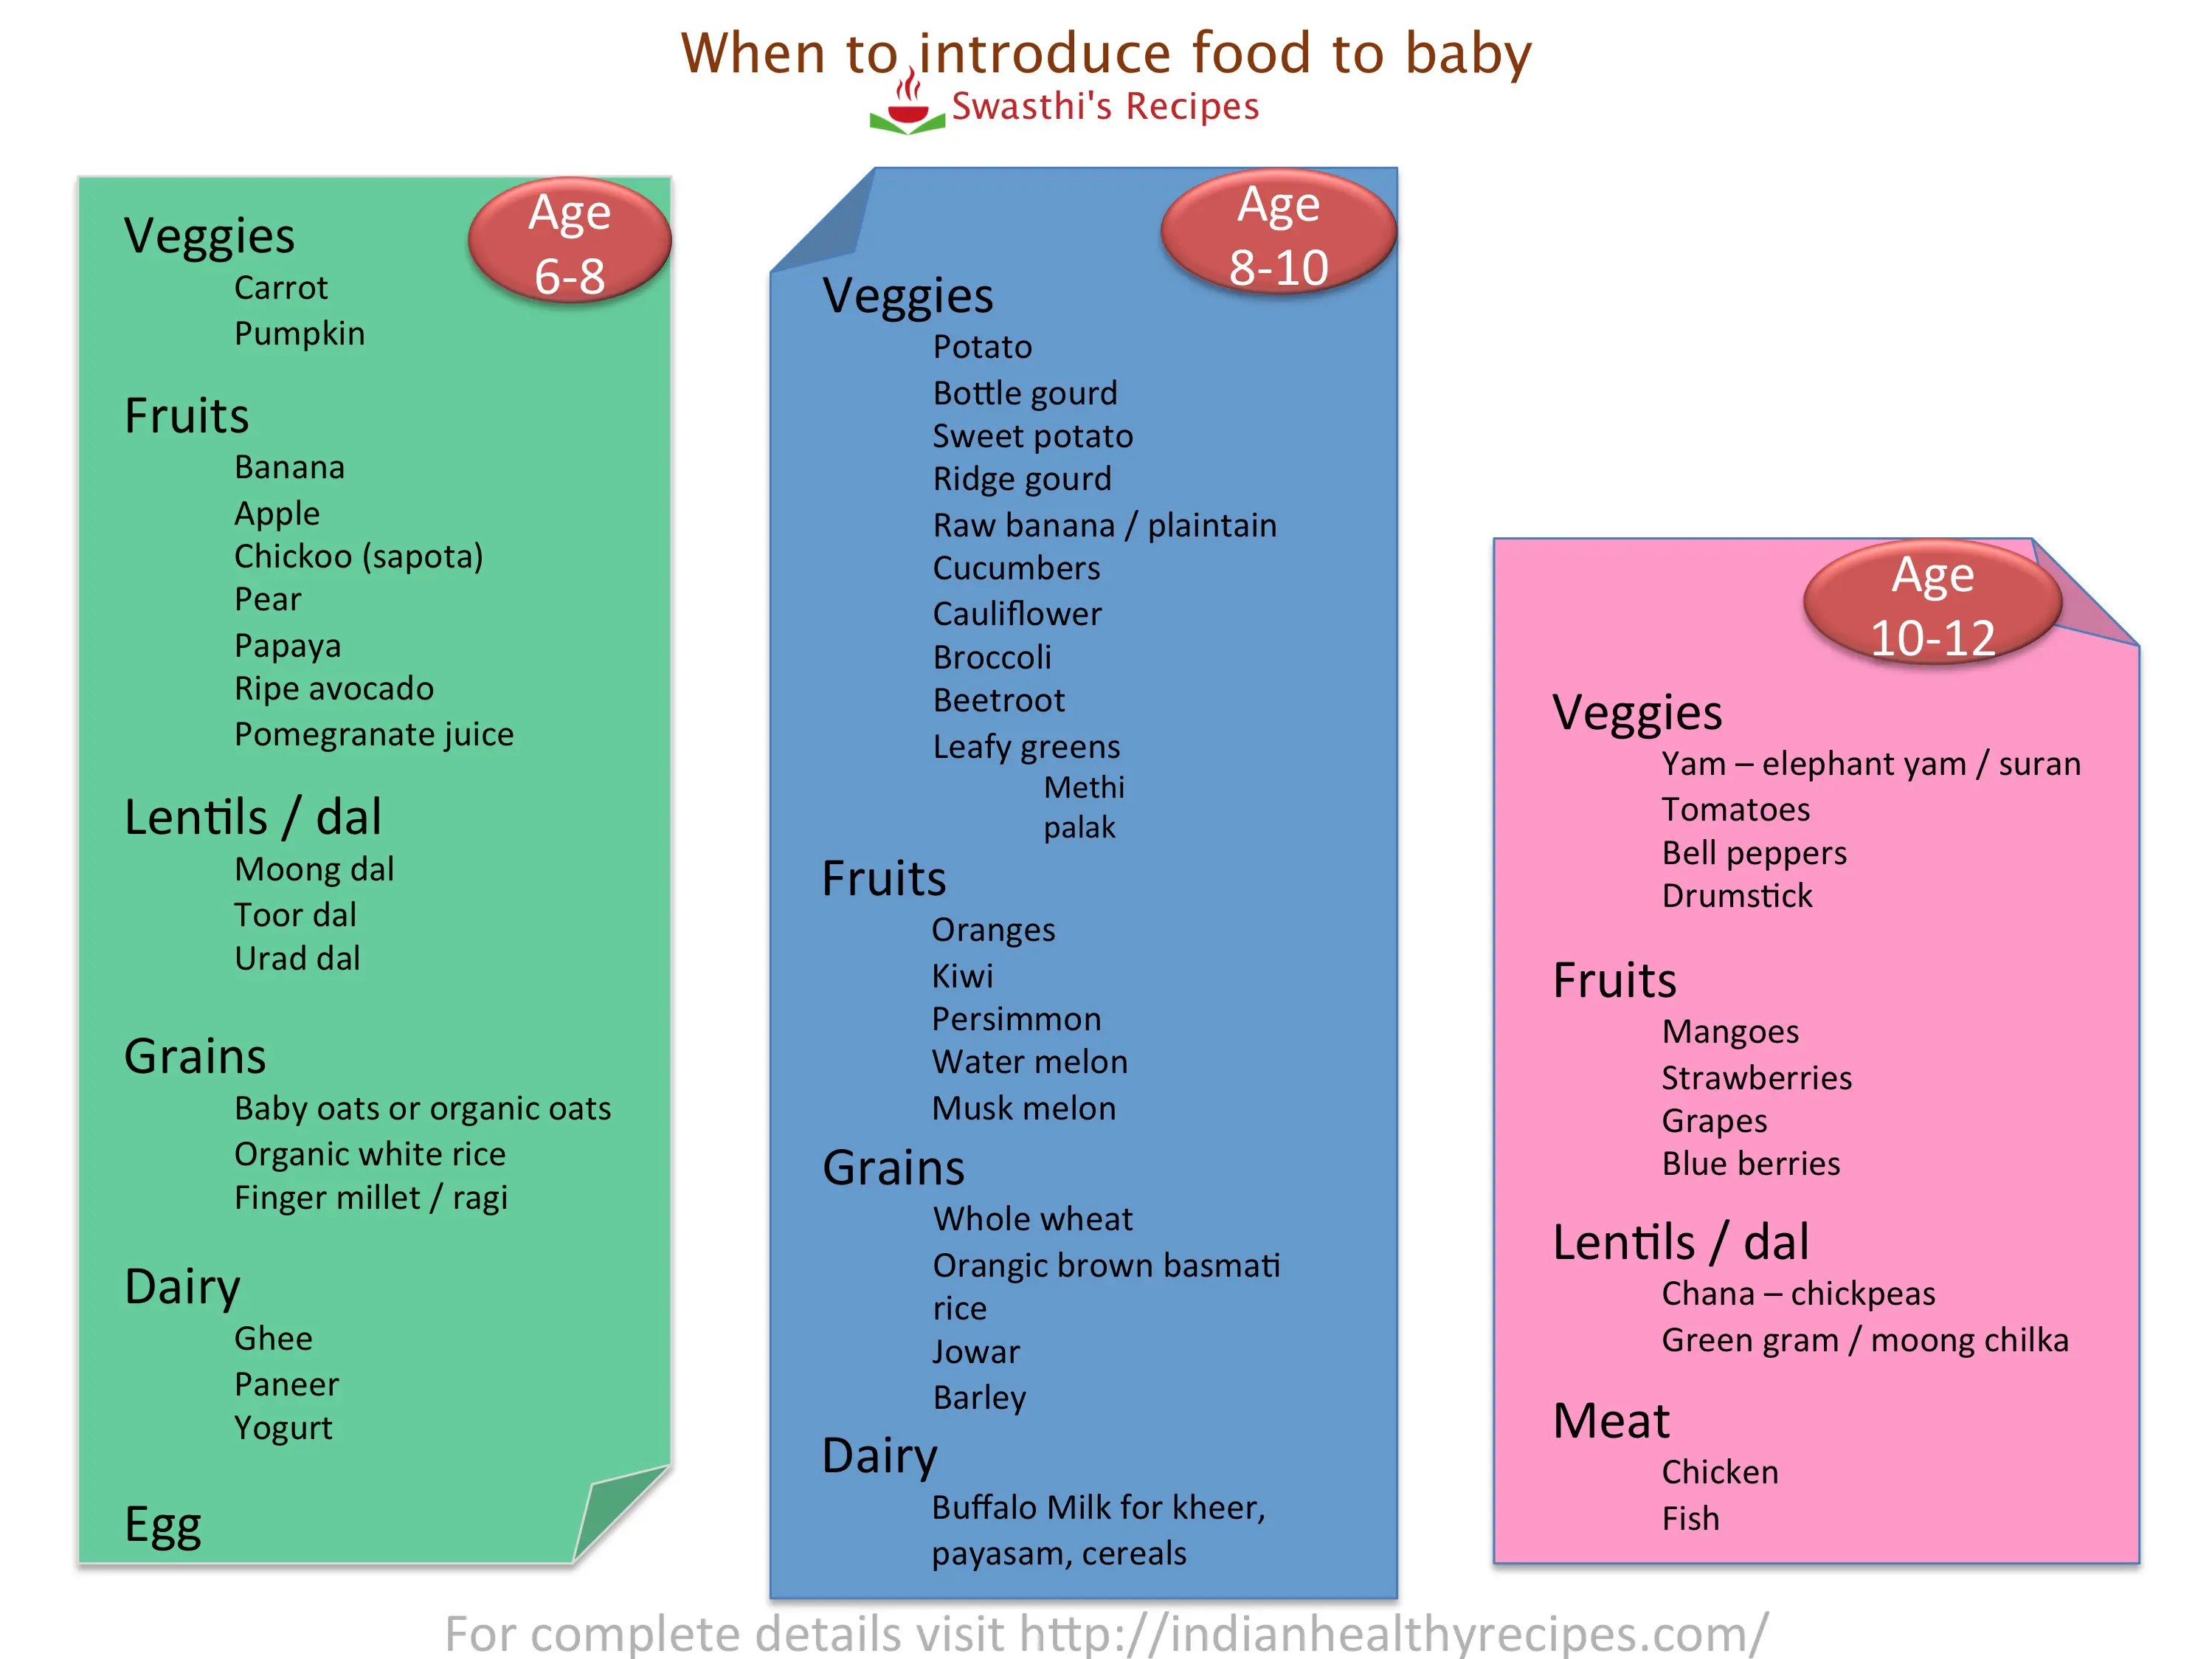 12-18 Months Baby Food Chart